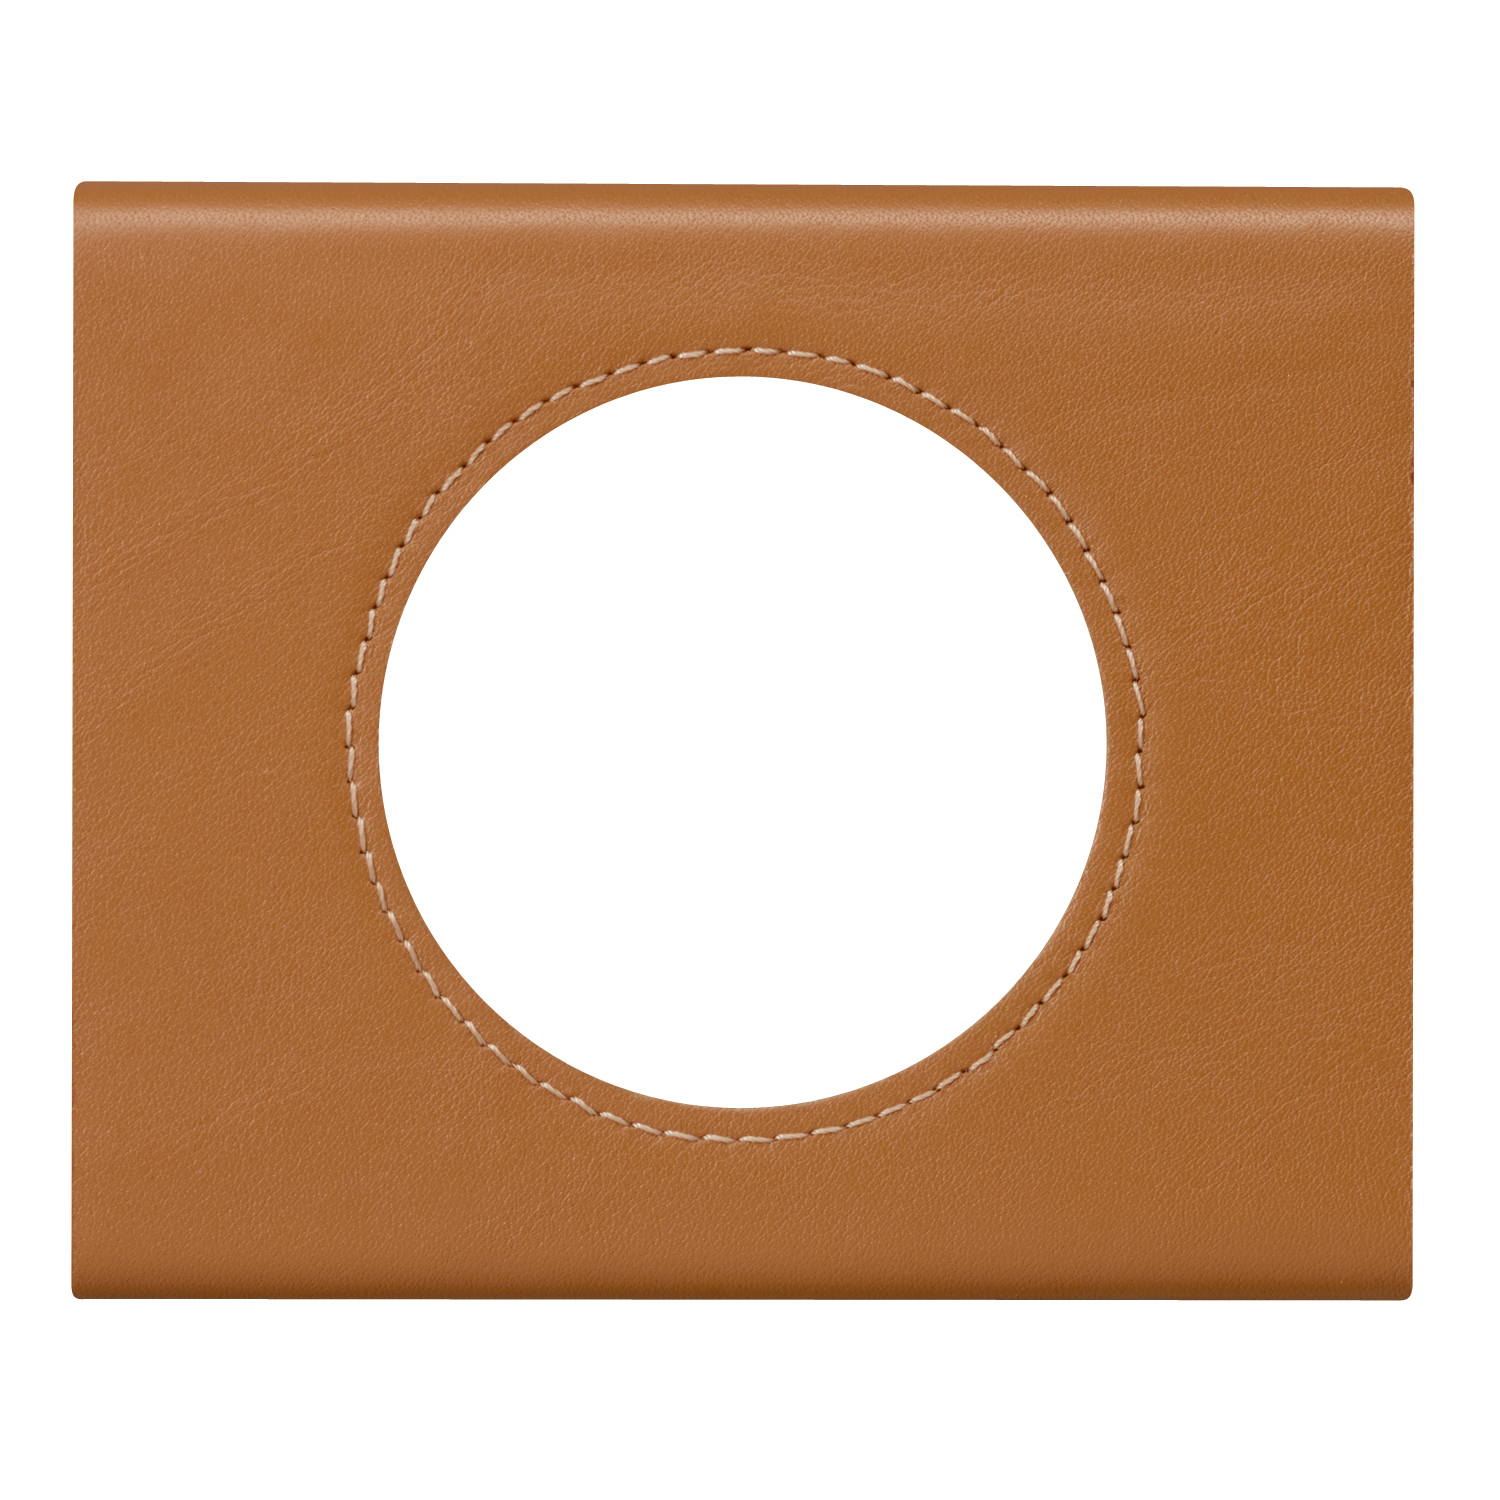 1 GANG PLATE LEATHER CARAMEL